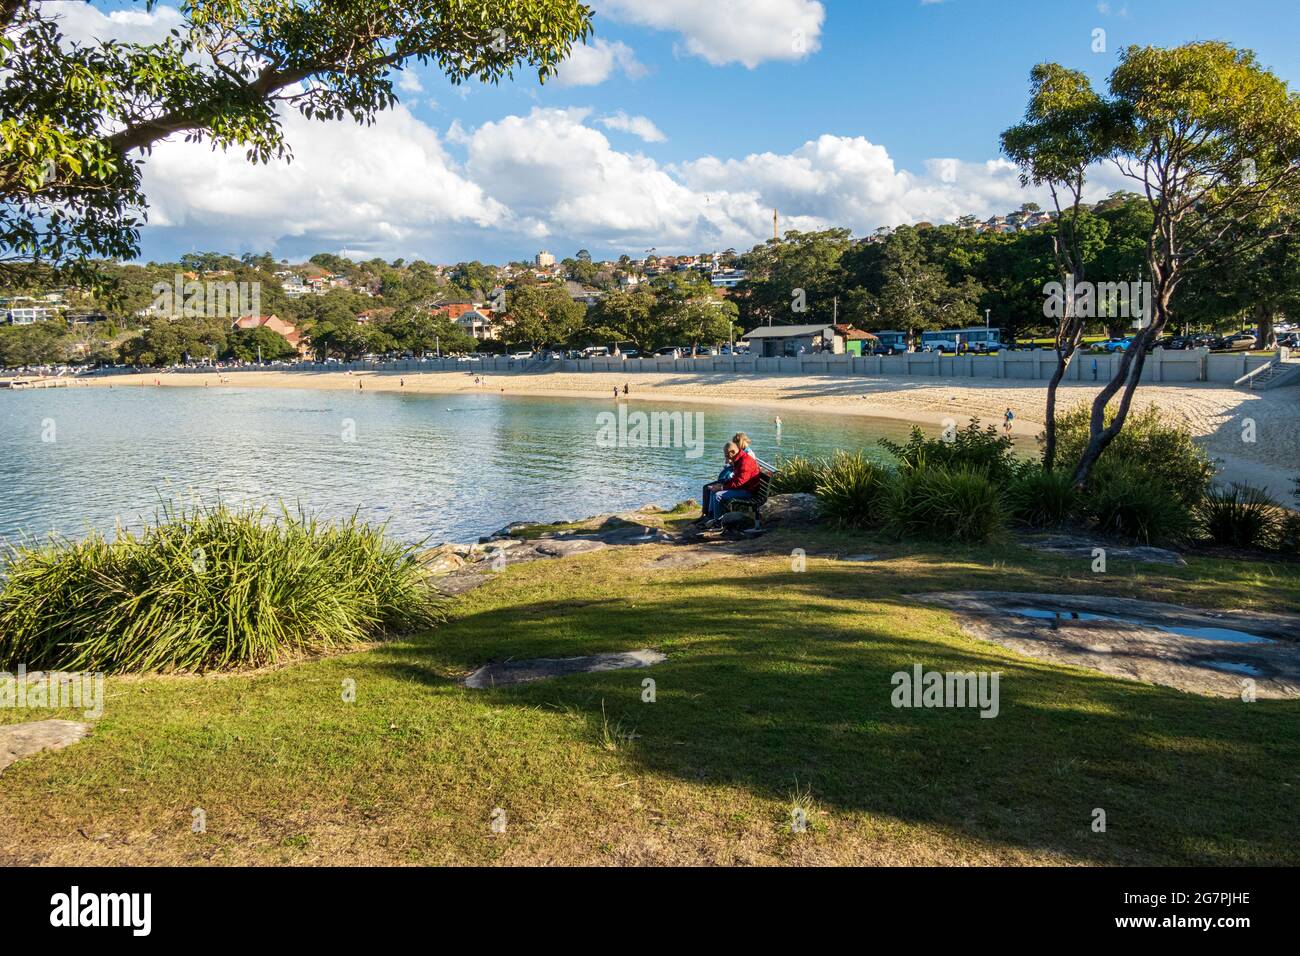 People sitting and relaxing on a sunny day at Balmoral Beach, Sydney, Australia, during the pandemic lockdown Stock Photo